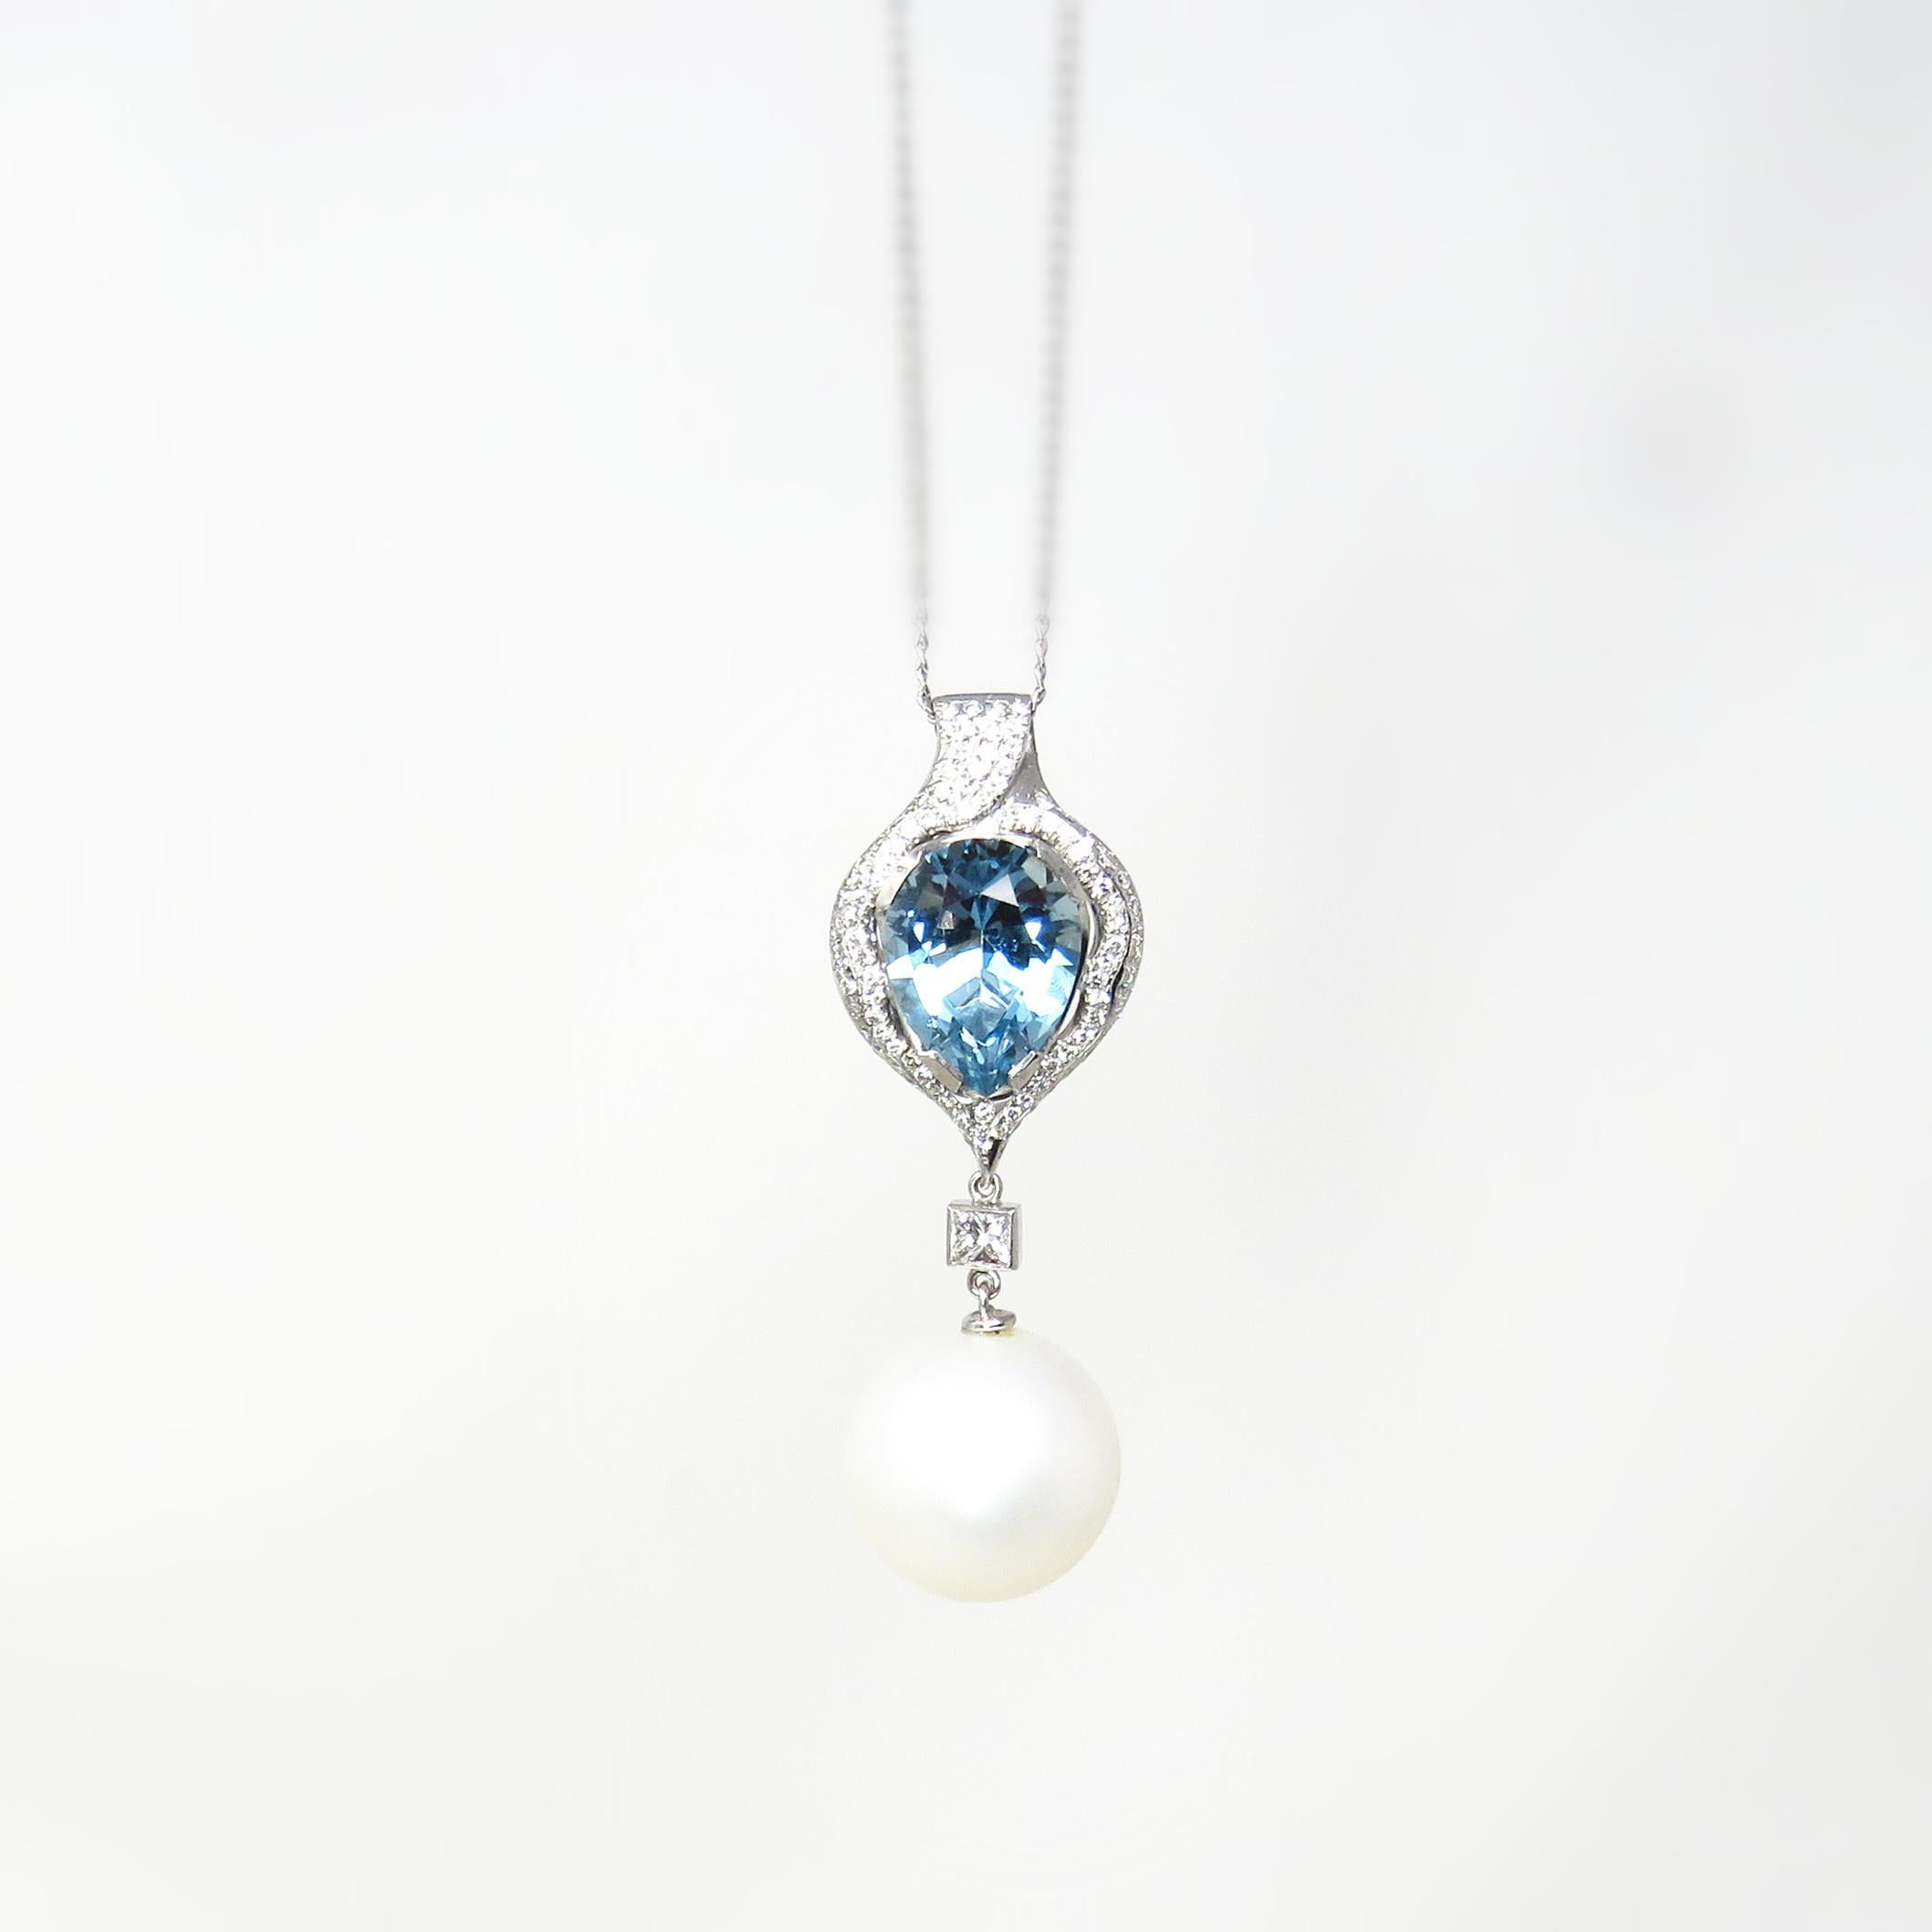 This stunning necklace pendant features a striking blue Aquamarine gemstone that measures about 15.5 x 11.5mm, incased in a halo of diamonds.  Set below the gemstone is a fascinating high luster 17 mm South Seas cultured pearl.

The pendant features